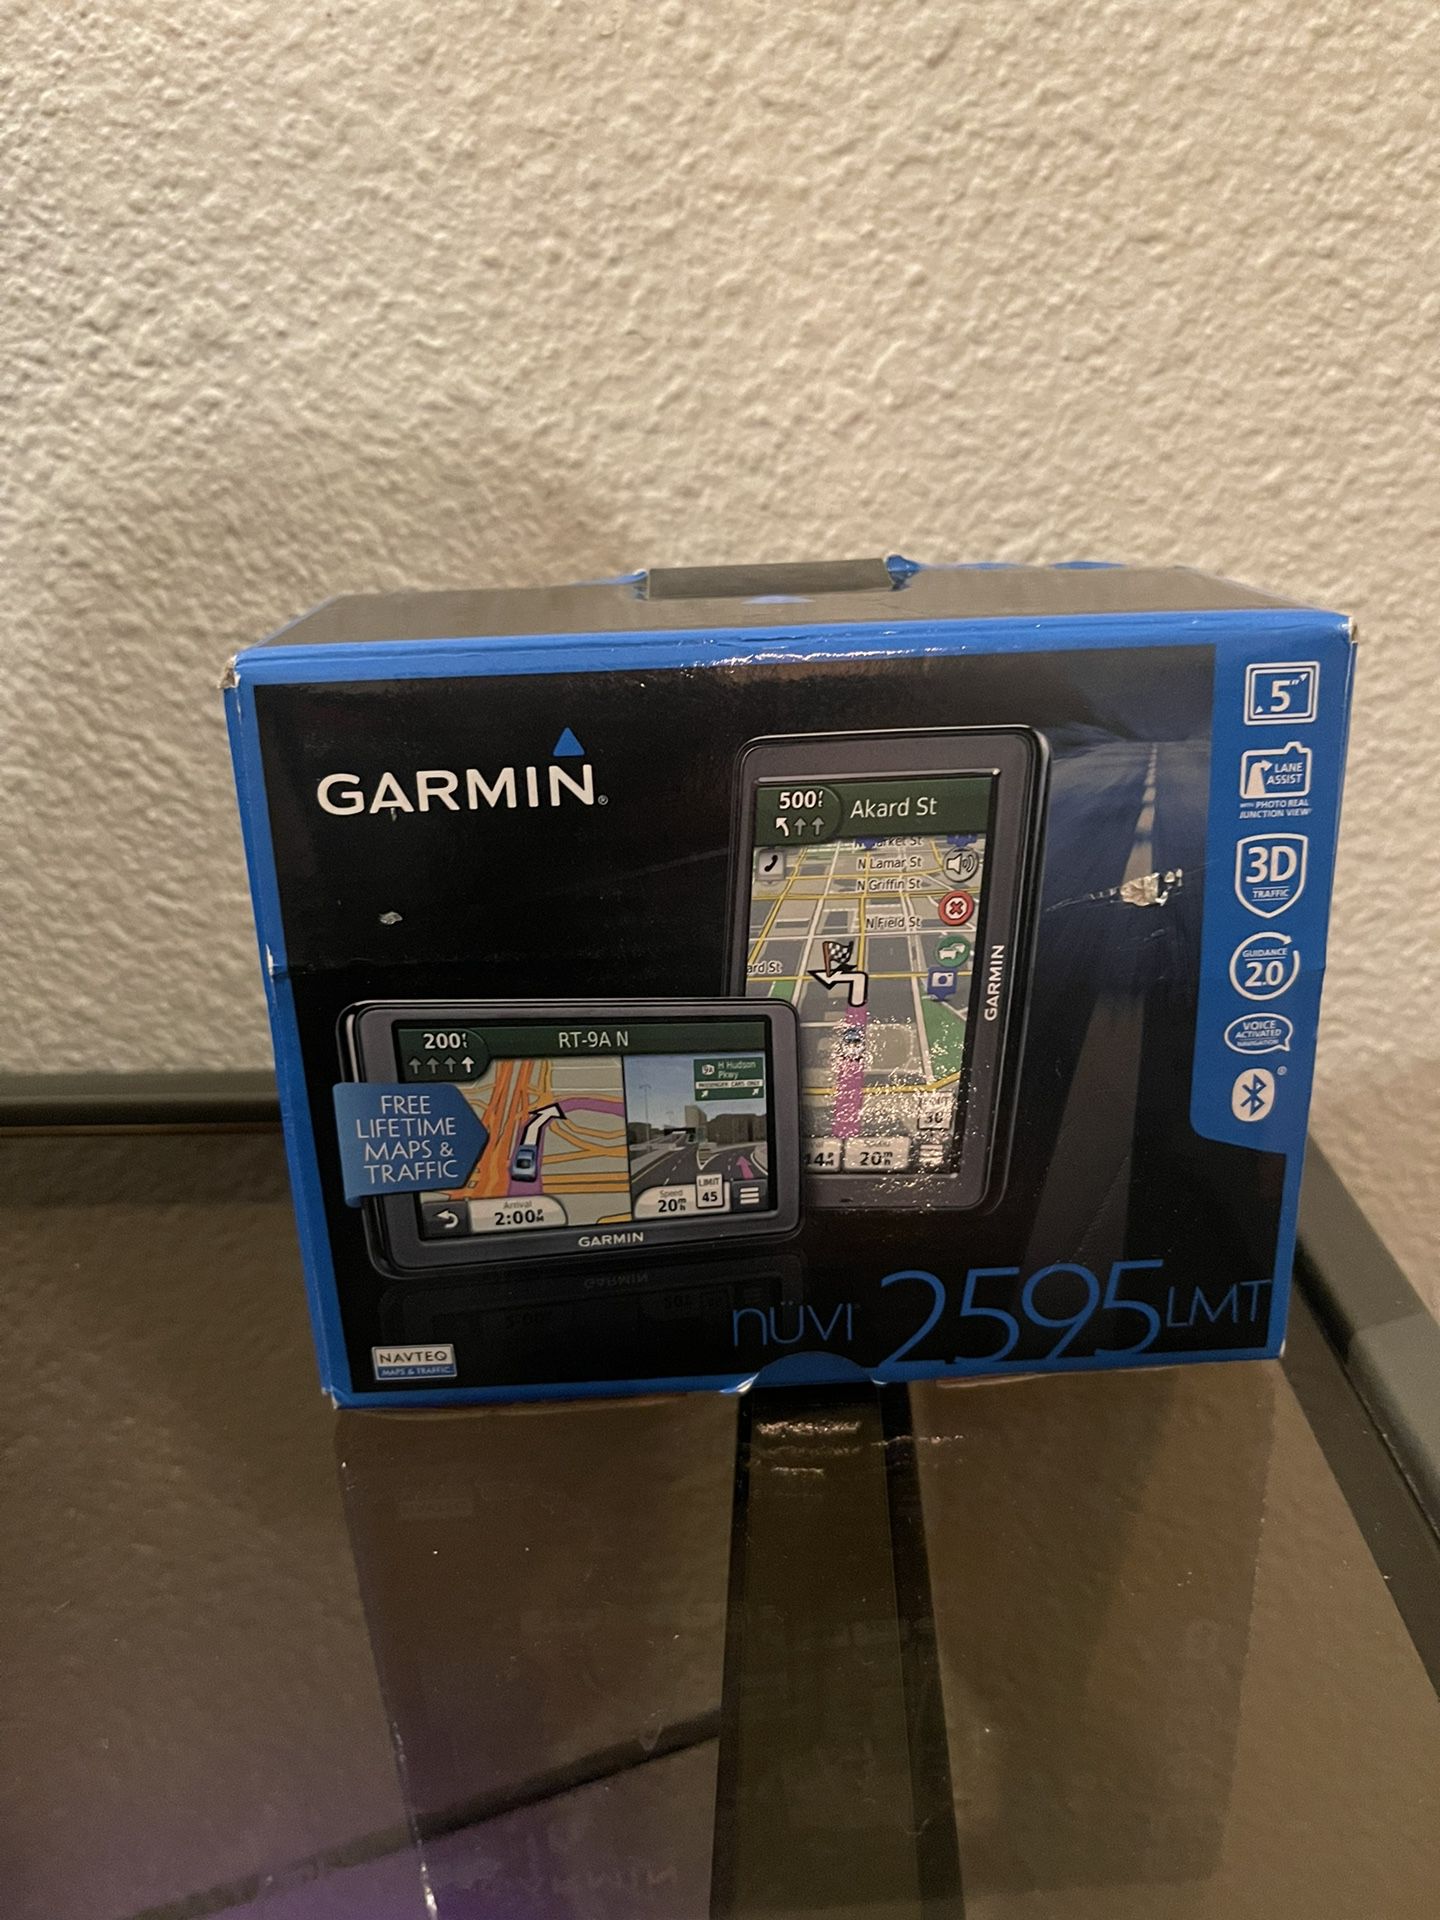 Garmin nüvi 2595LMT 5-Inch Portable Bluetooth Navigator with Lifetime Maps and Traffic for Sale in - OfferUp